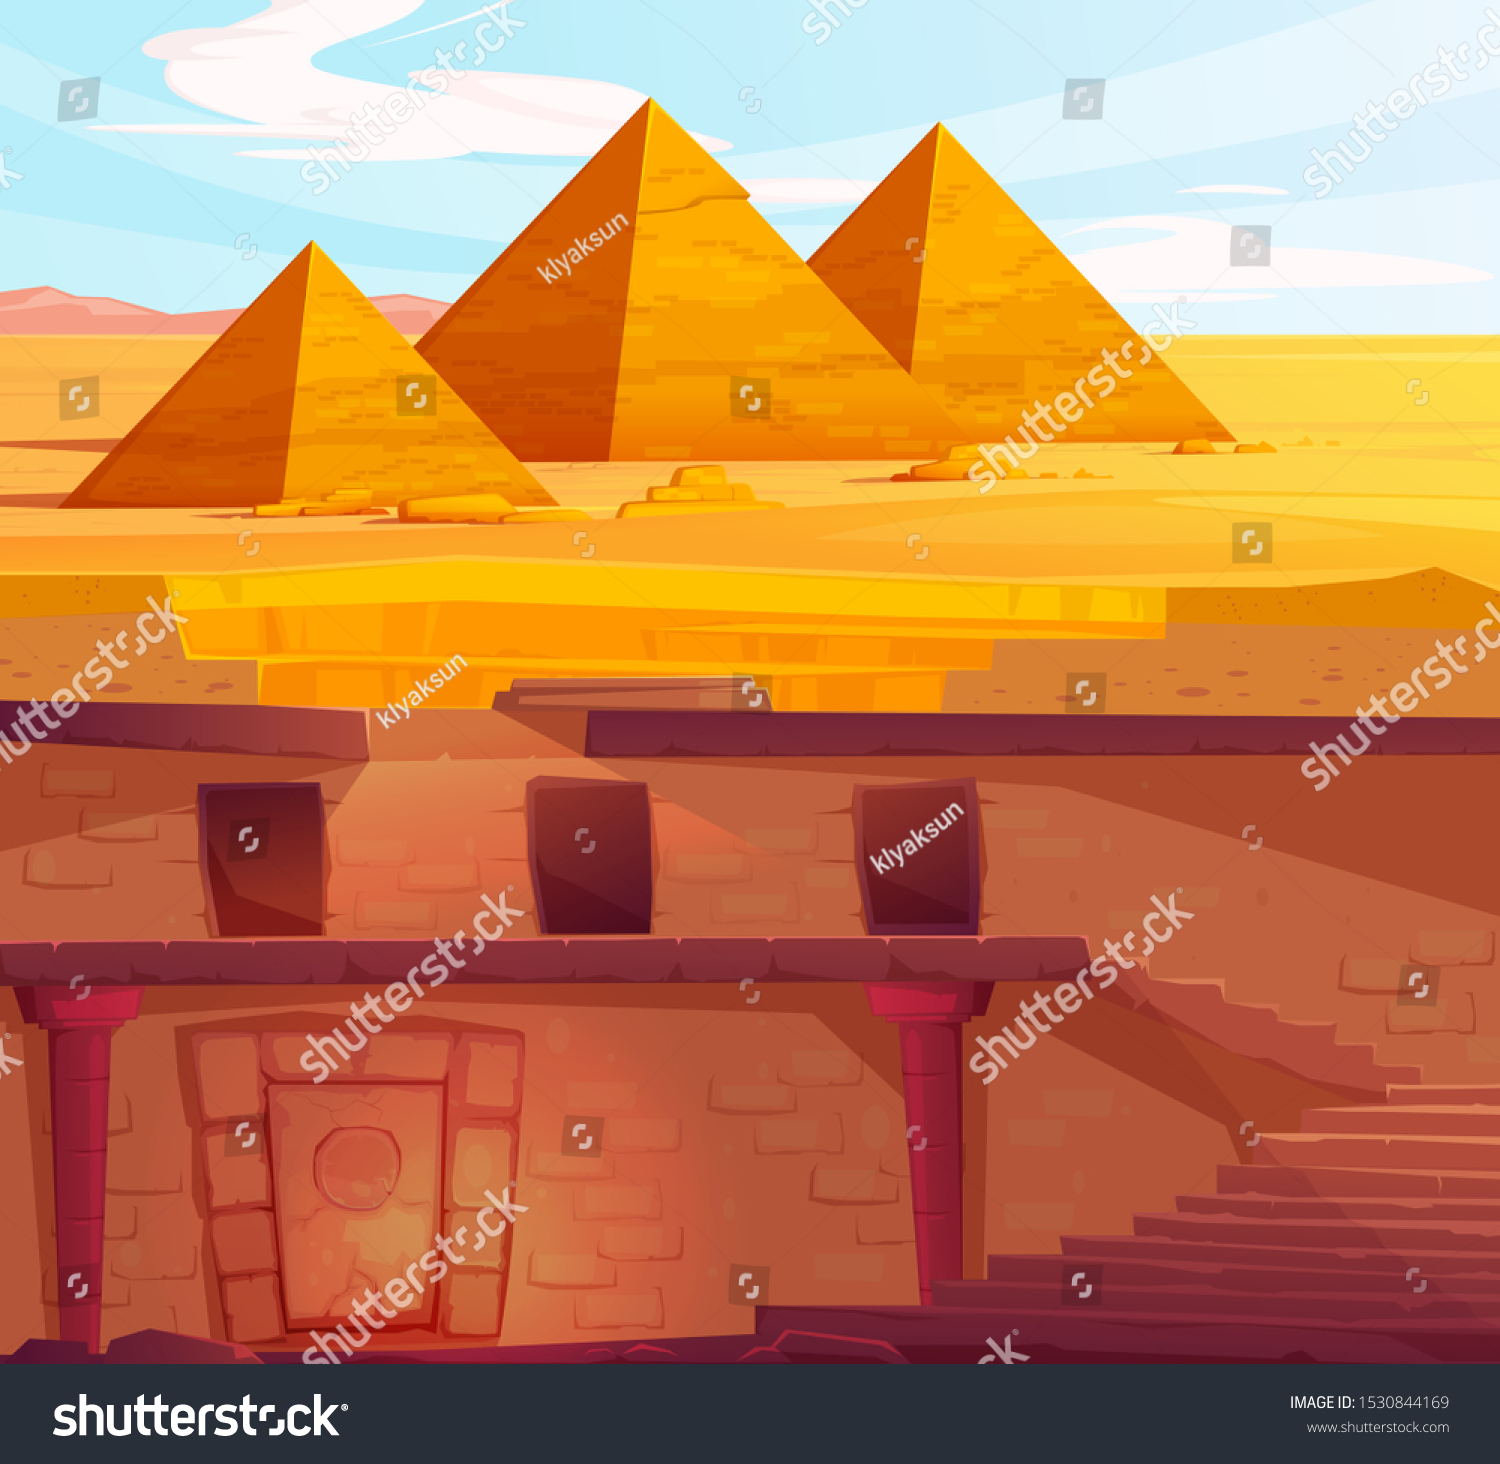 5,174 Wall crypt Images, Stock Photos & Vectors | Shutterstock